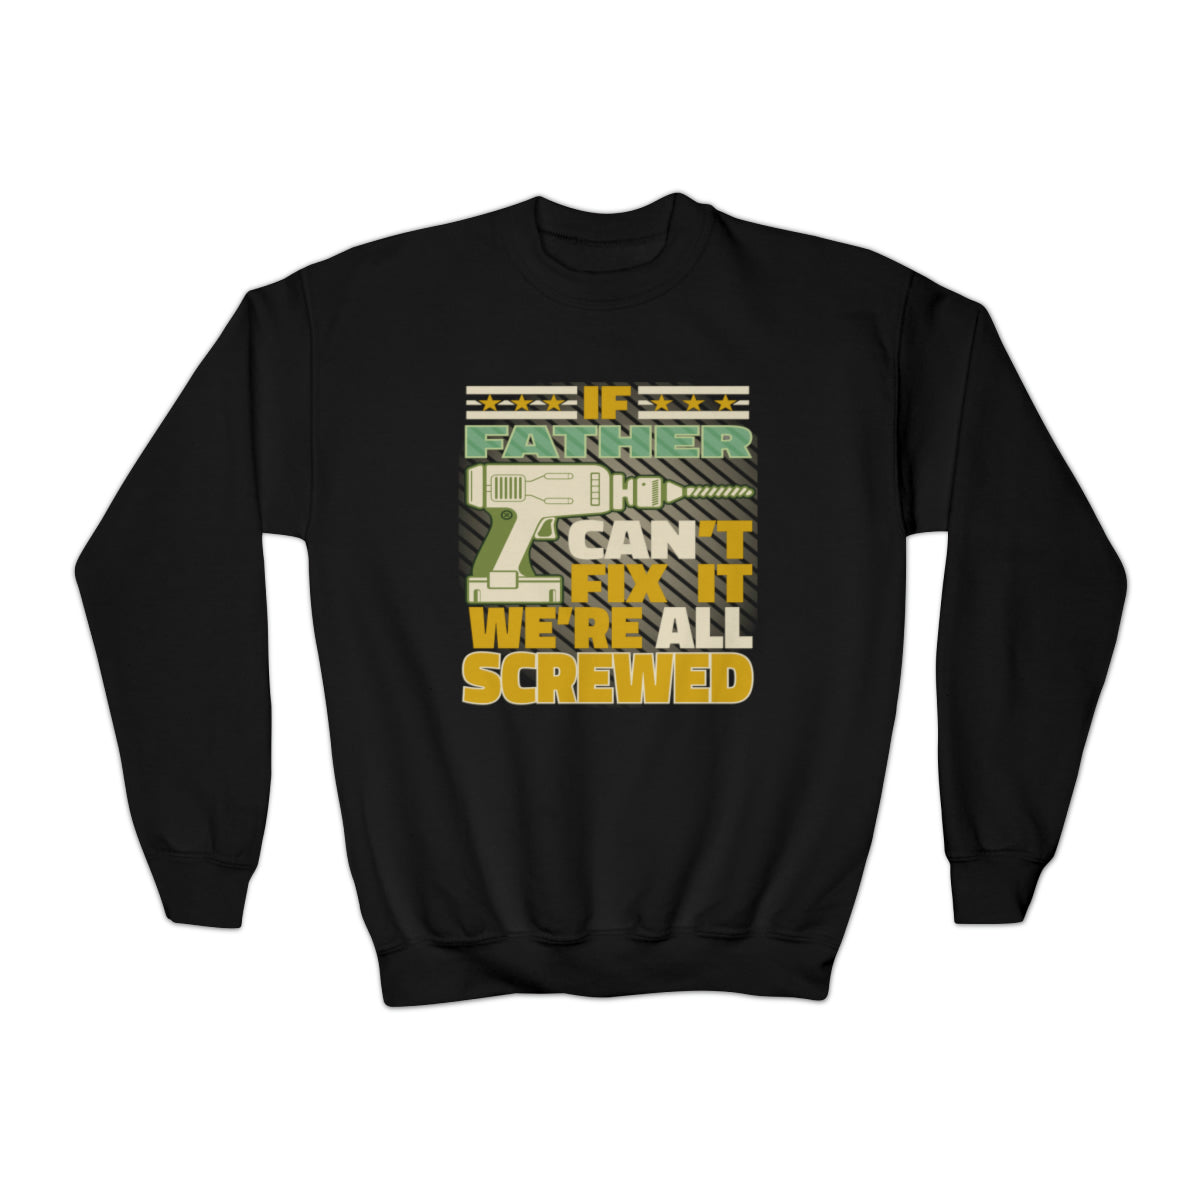 If Father Can't Fix It We Re All Screwed Crewneck Sweatshirt